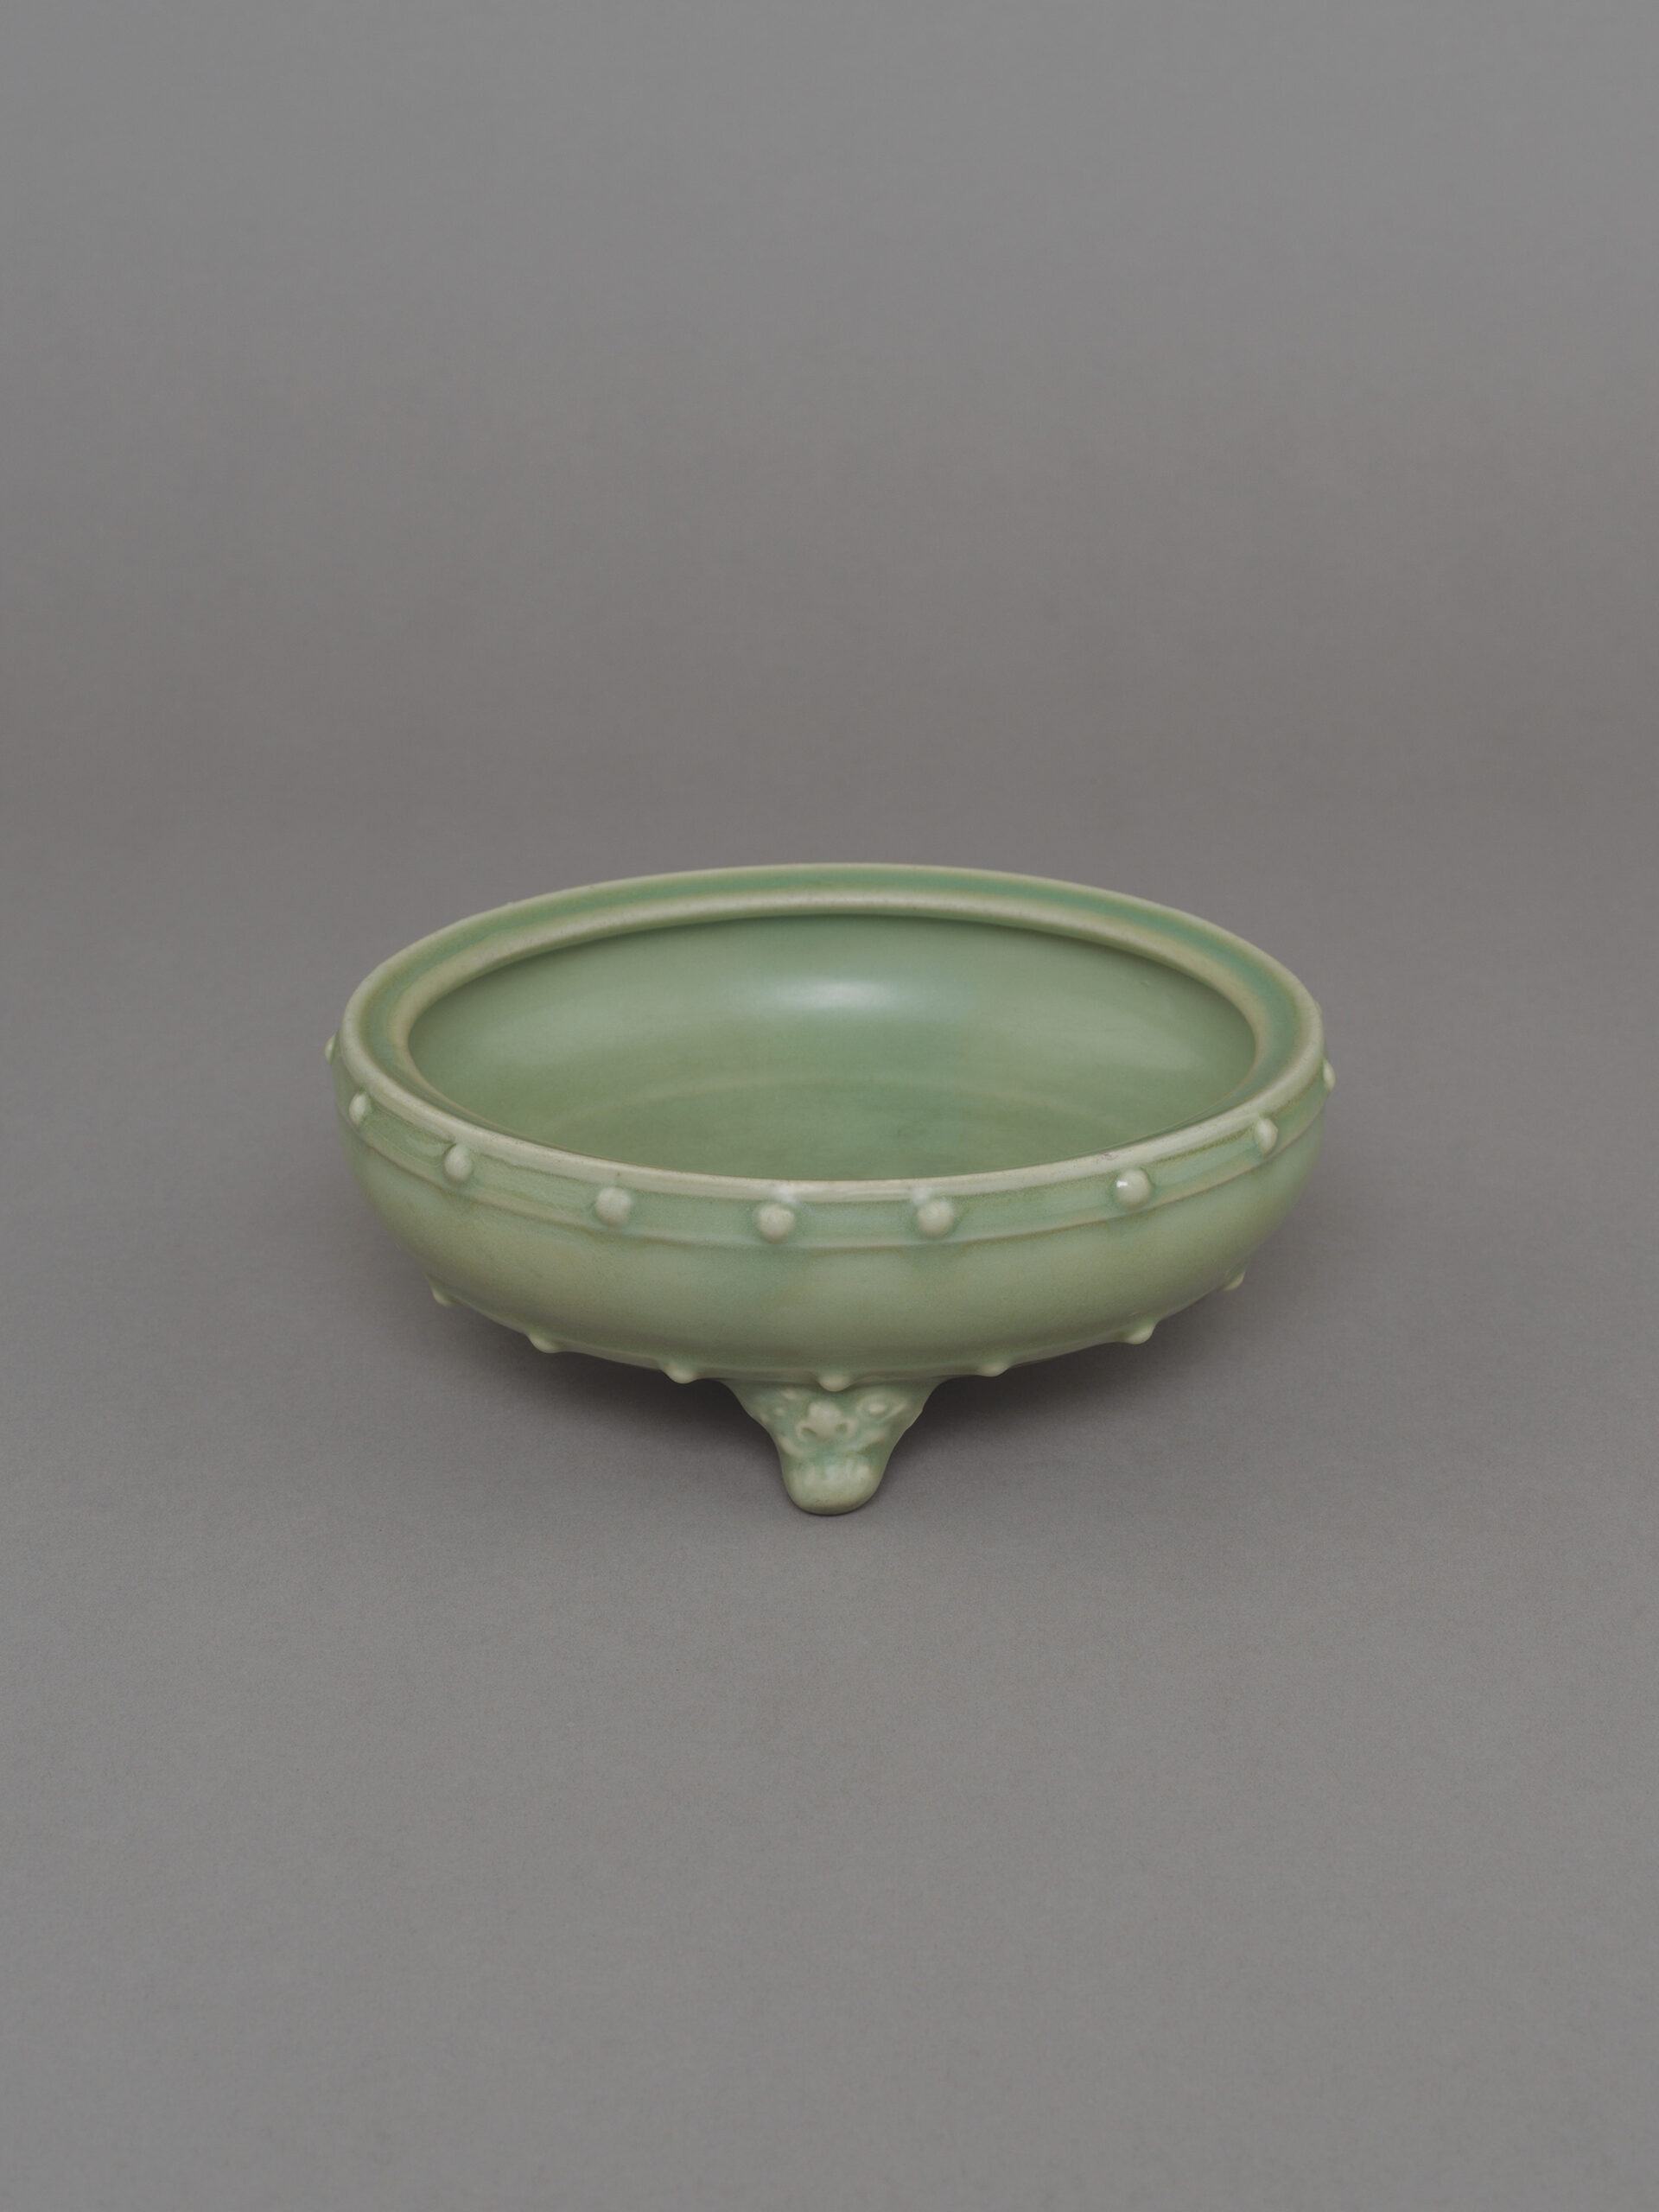 No. 40 - Chinese ceramic Longquan celadon glazed tripod washer, xi, or censer, lu, of circular drum form with two registers of relief drum-nail studs or bosses on three animal-mask feet with gently inverted rim, covered overall in a pale celadon glaze, with knife-cut biscuit foot rim burnt at the edges. 7 1⁄4 inches, 18.5 cm diameter. Southern Song dynasty, Longquan kilns, Zhejiang Province, 12th – 13th century. Japanese wood box, the interior with label inscribed “Sung celadon 3 feet bowl”.